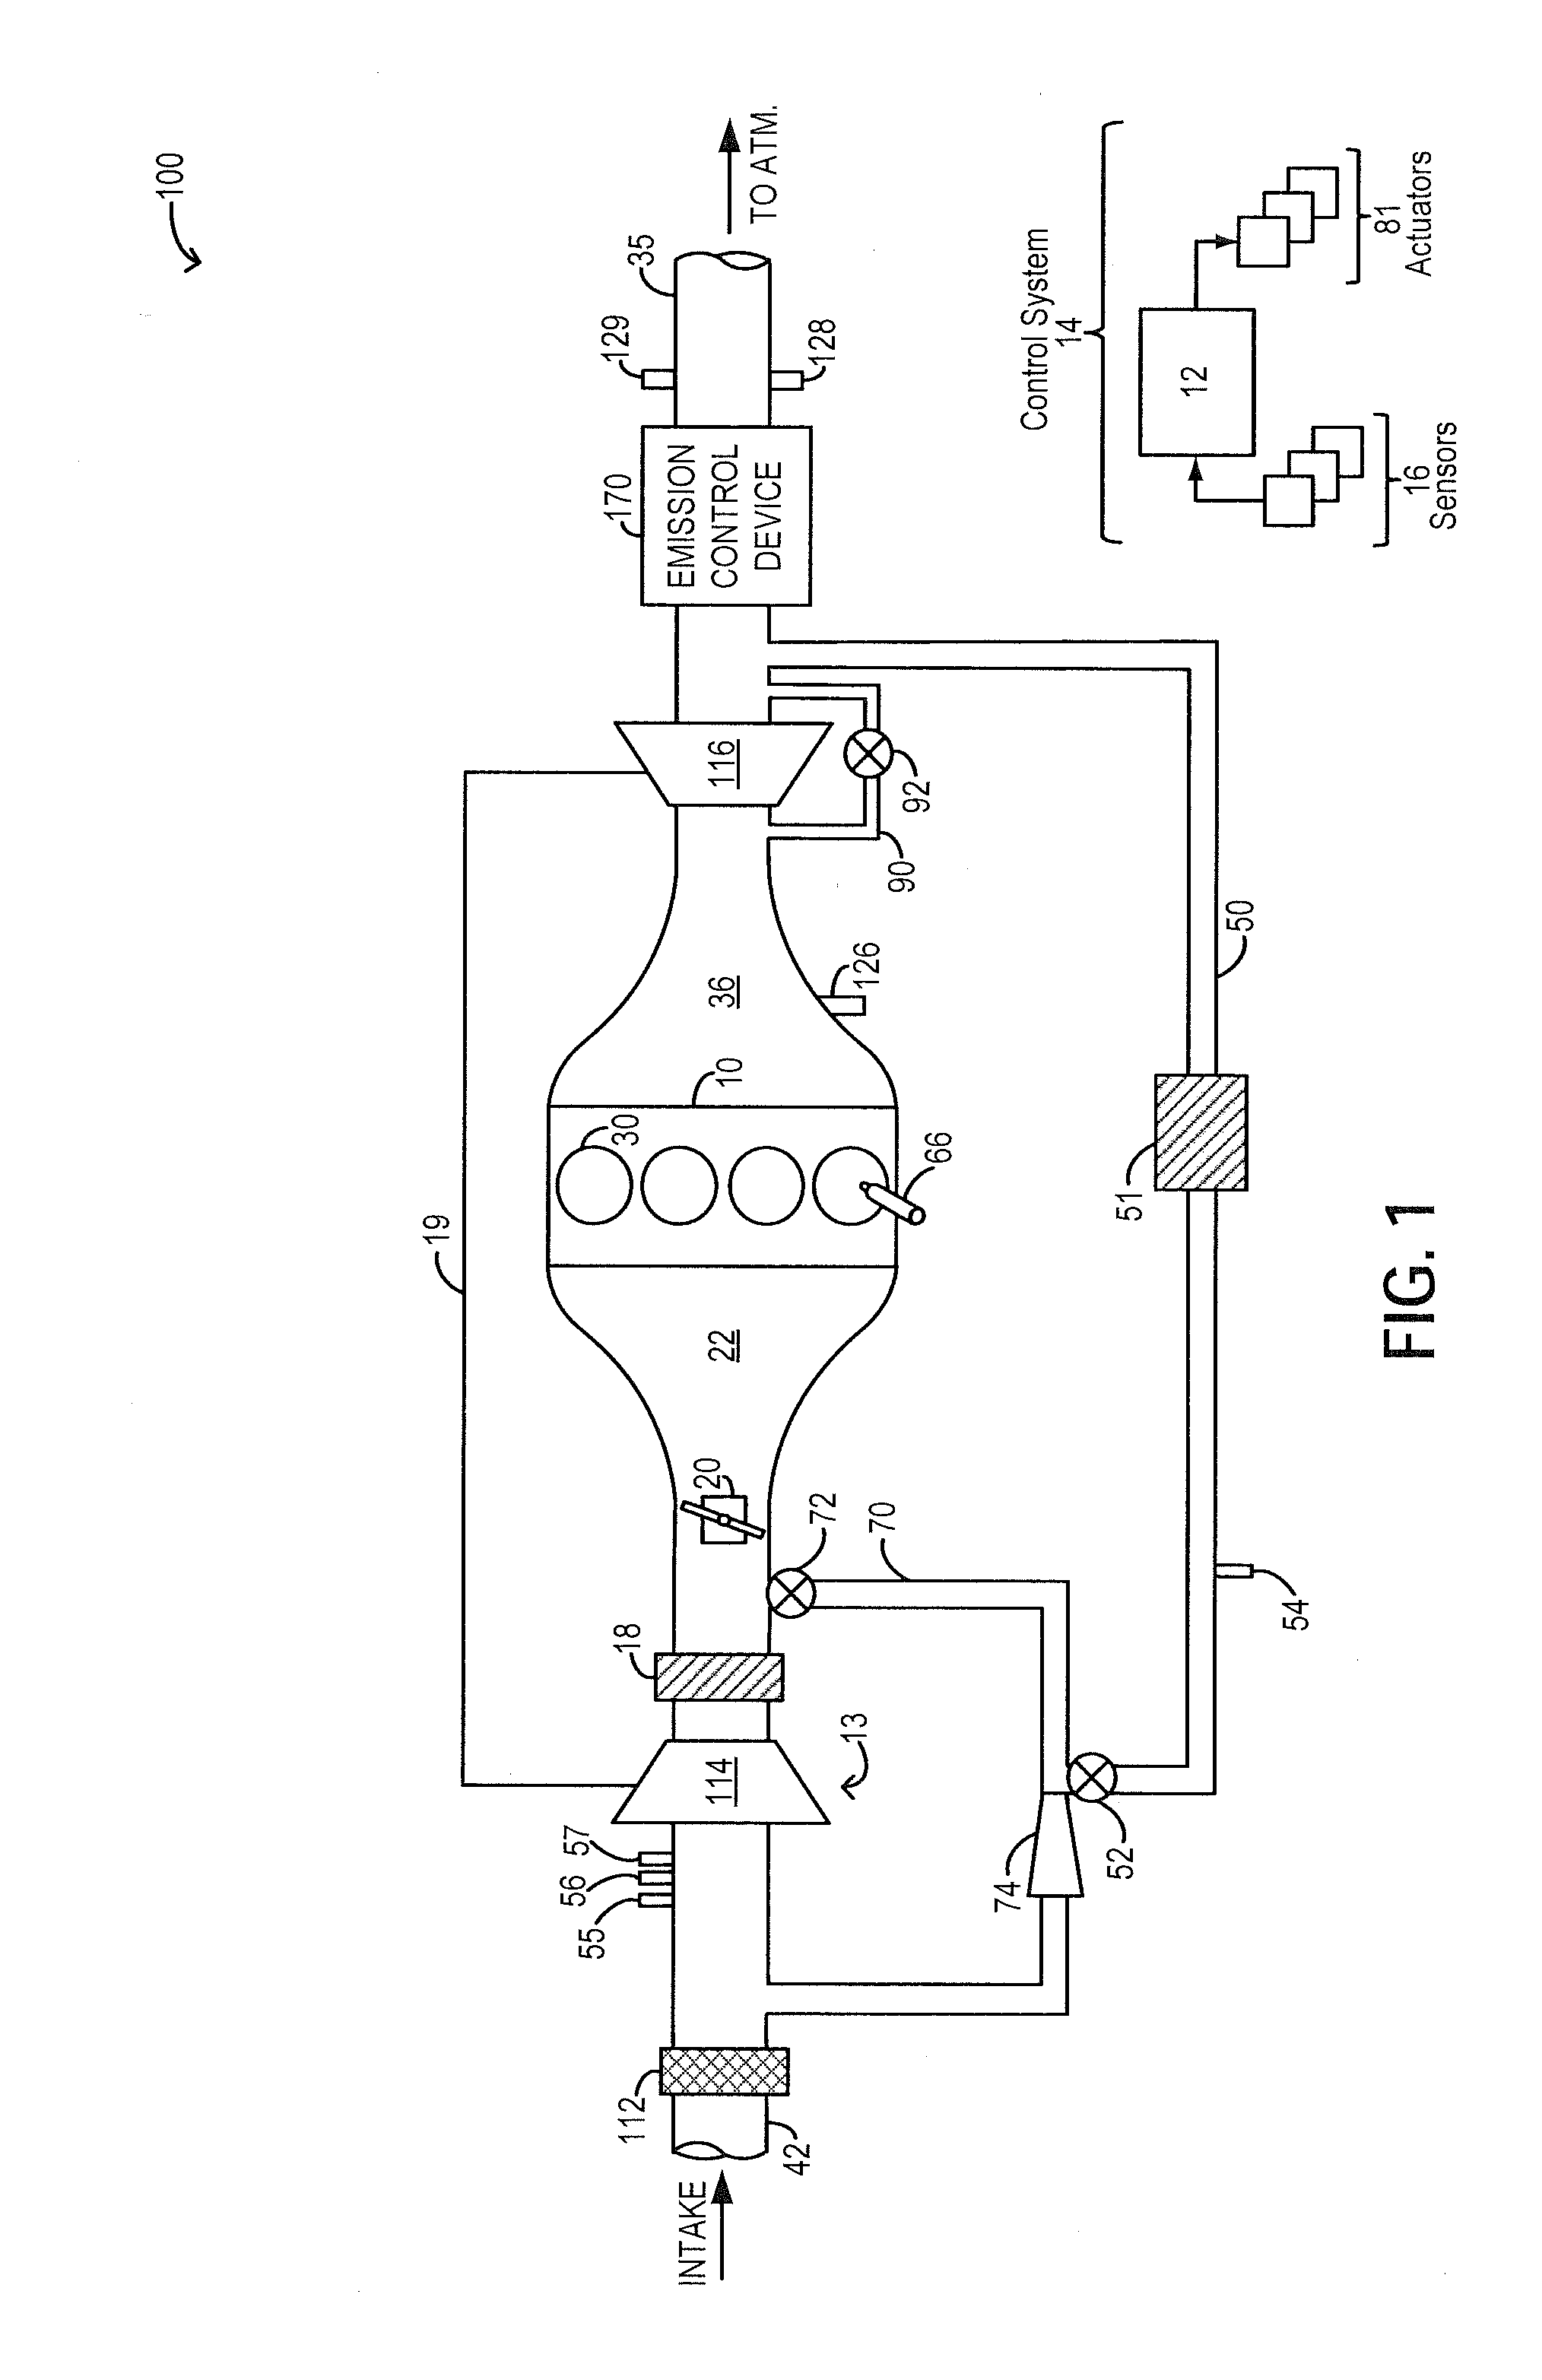 Methods and systems for egr control